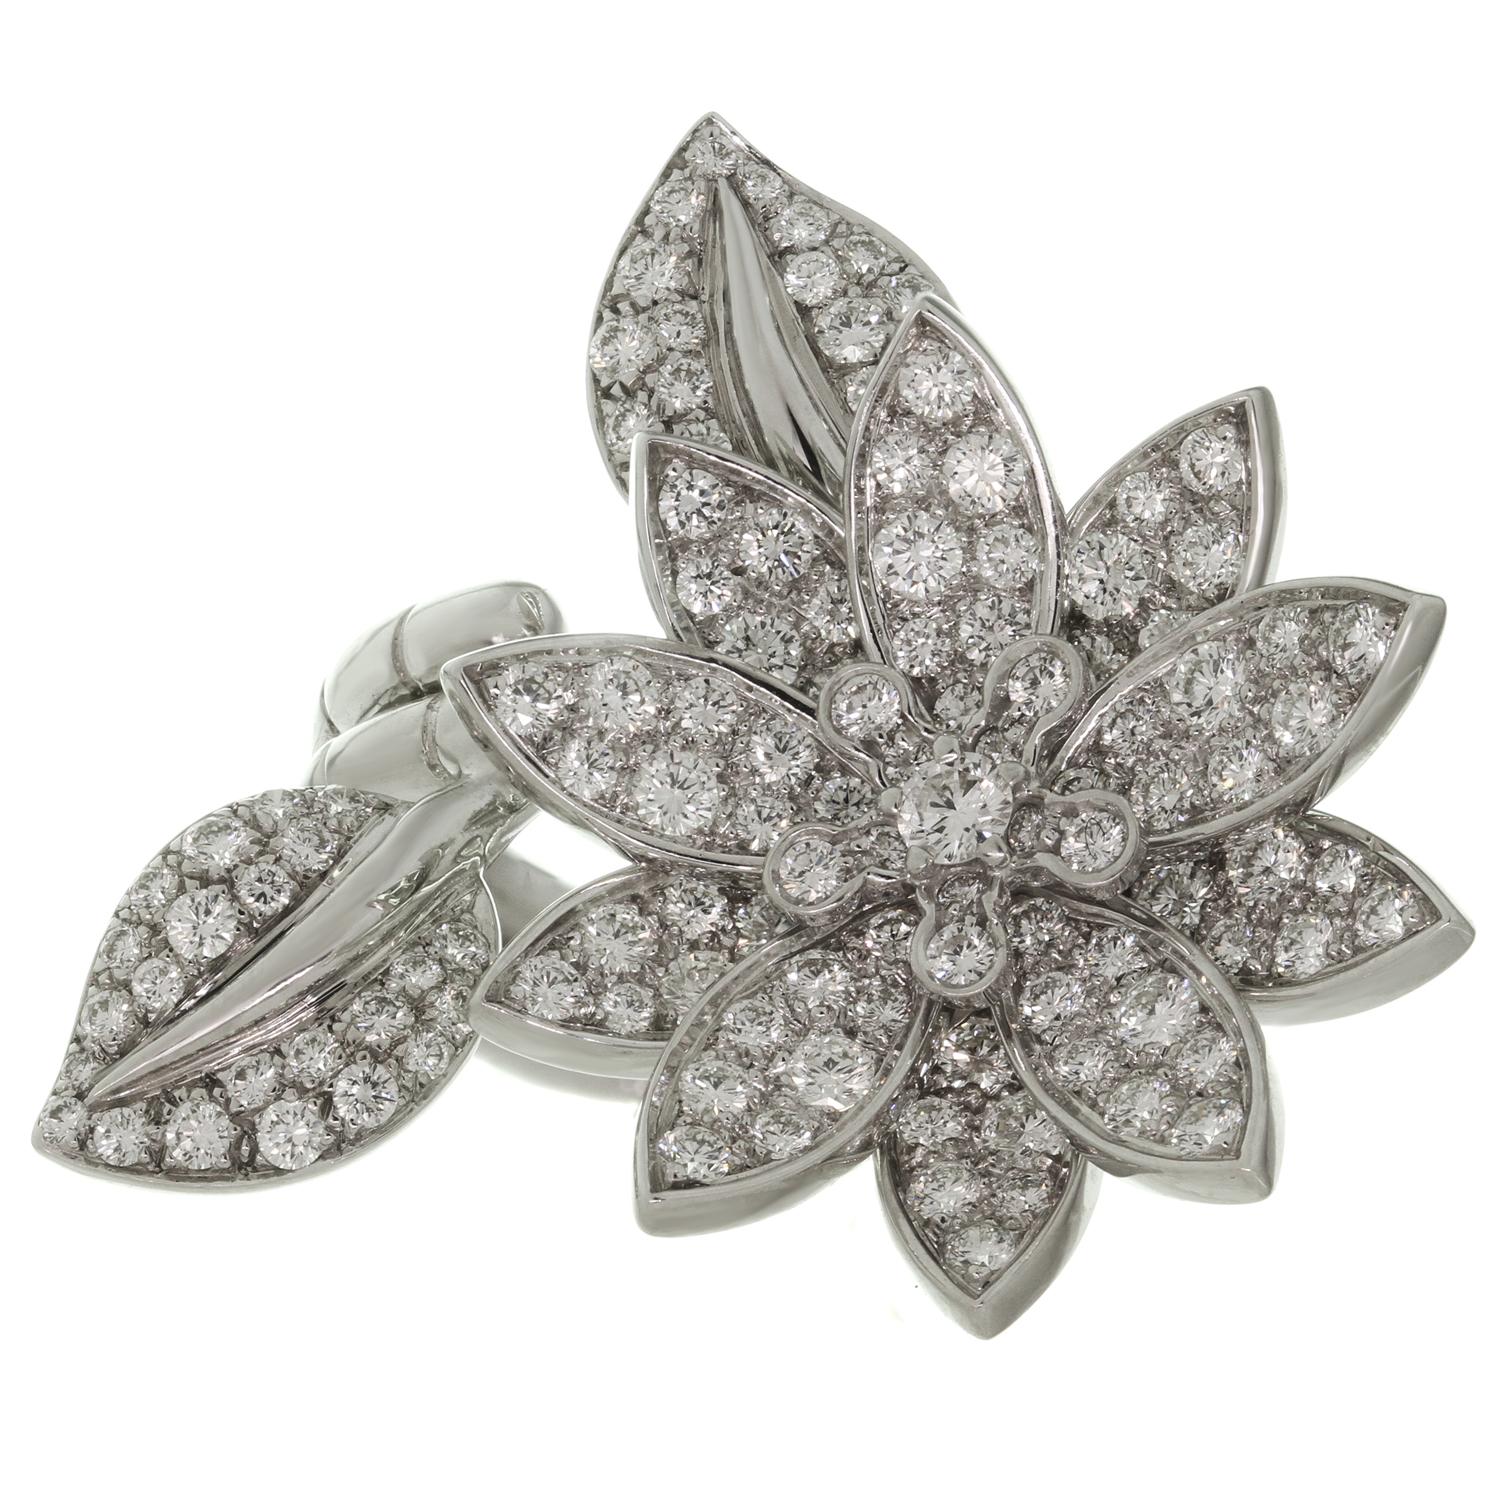 This fabulous Van Cleef & Arpels ring is crafted in 18k white gold and features a gorgeous lotus flower design set with 127 brilliant-cut round D-E VVS1-VVS2 diamonds of an estimated 2.20 carats. This between-the-finger ring can be worn on either